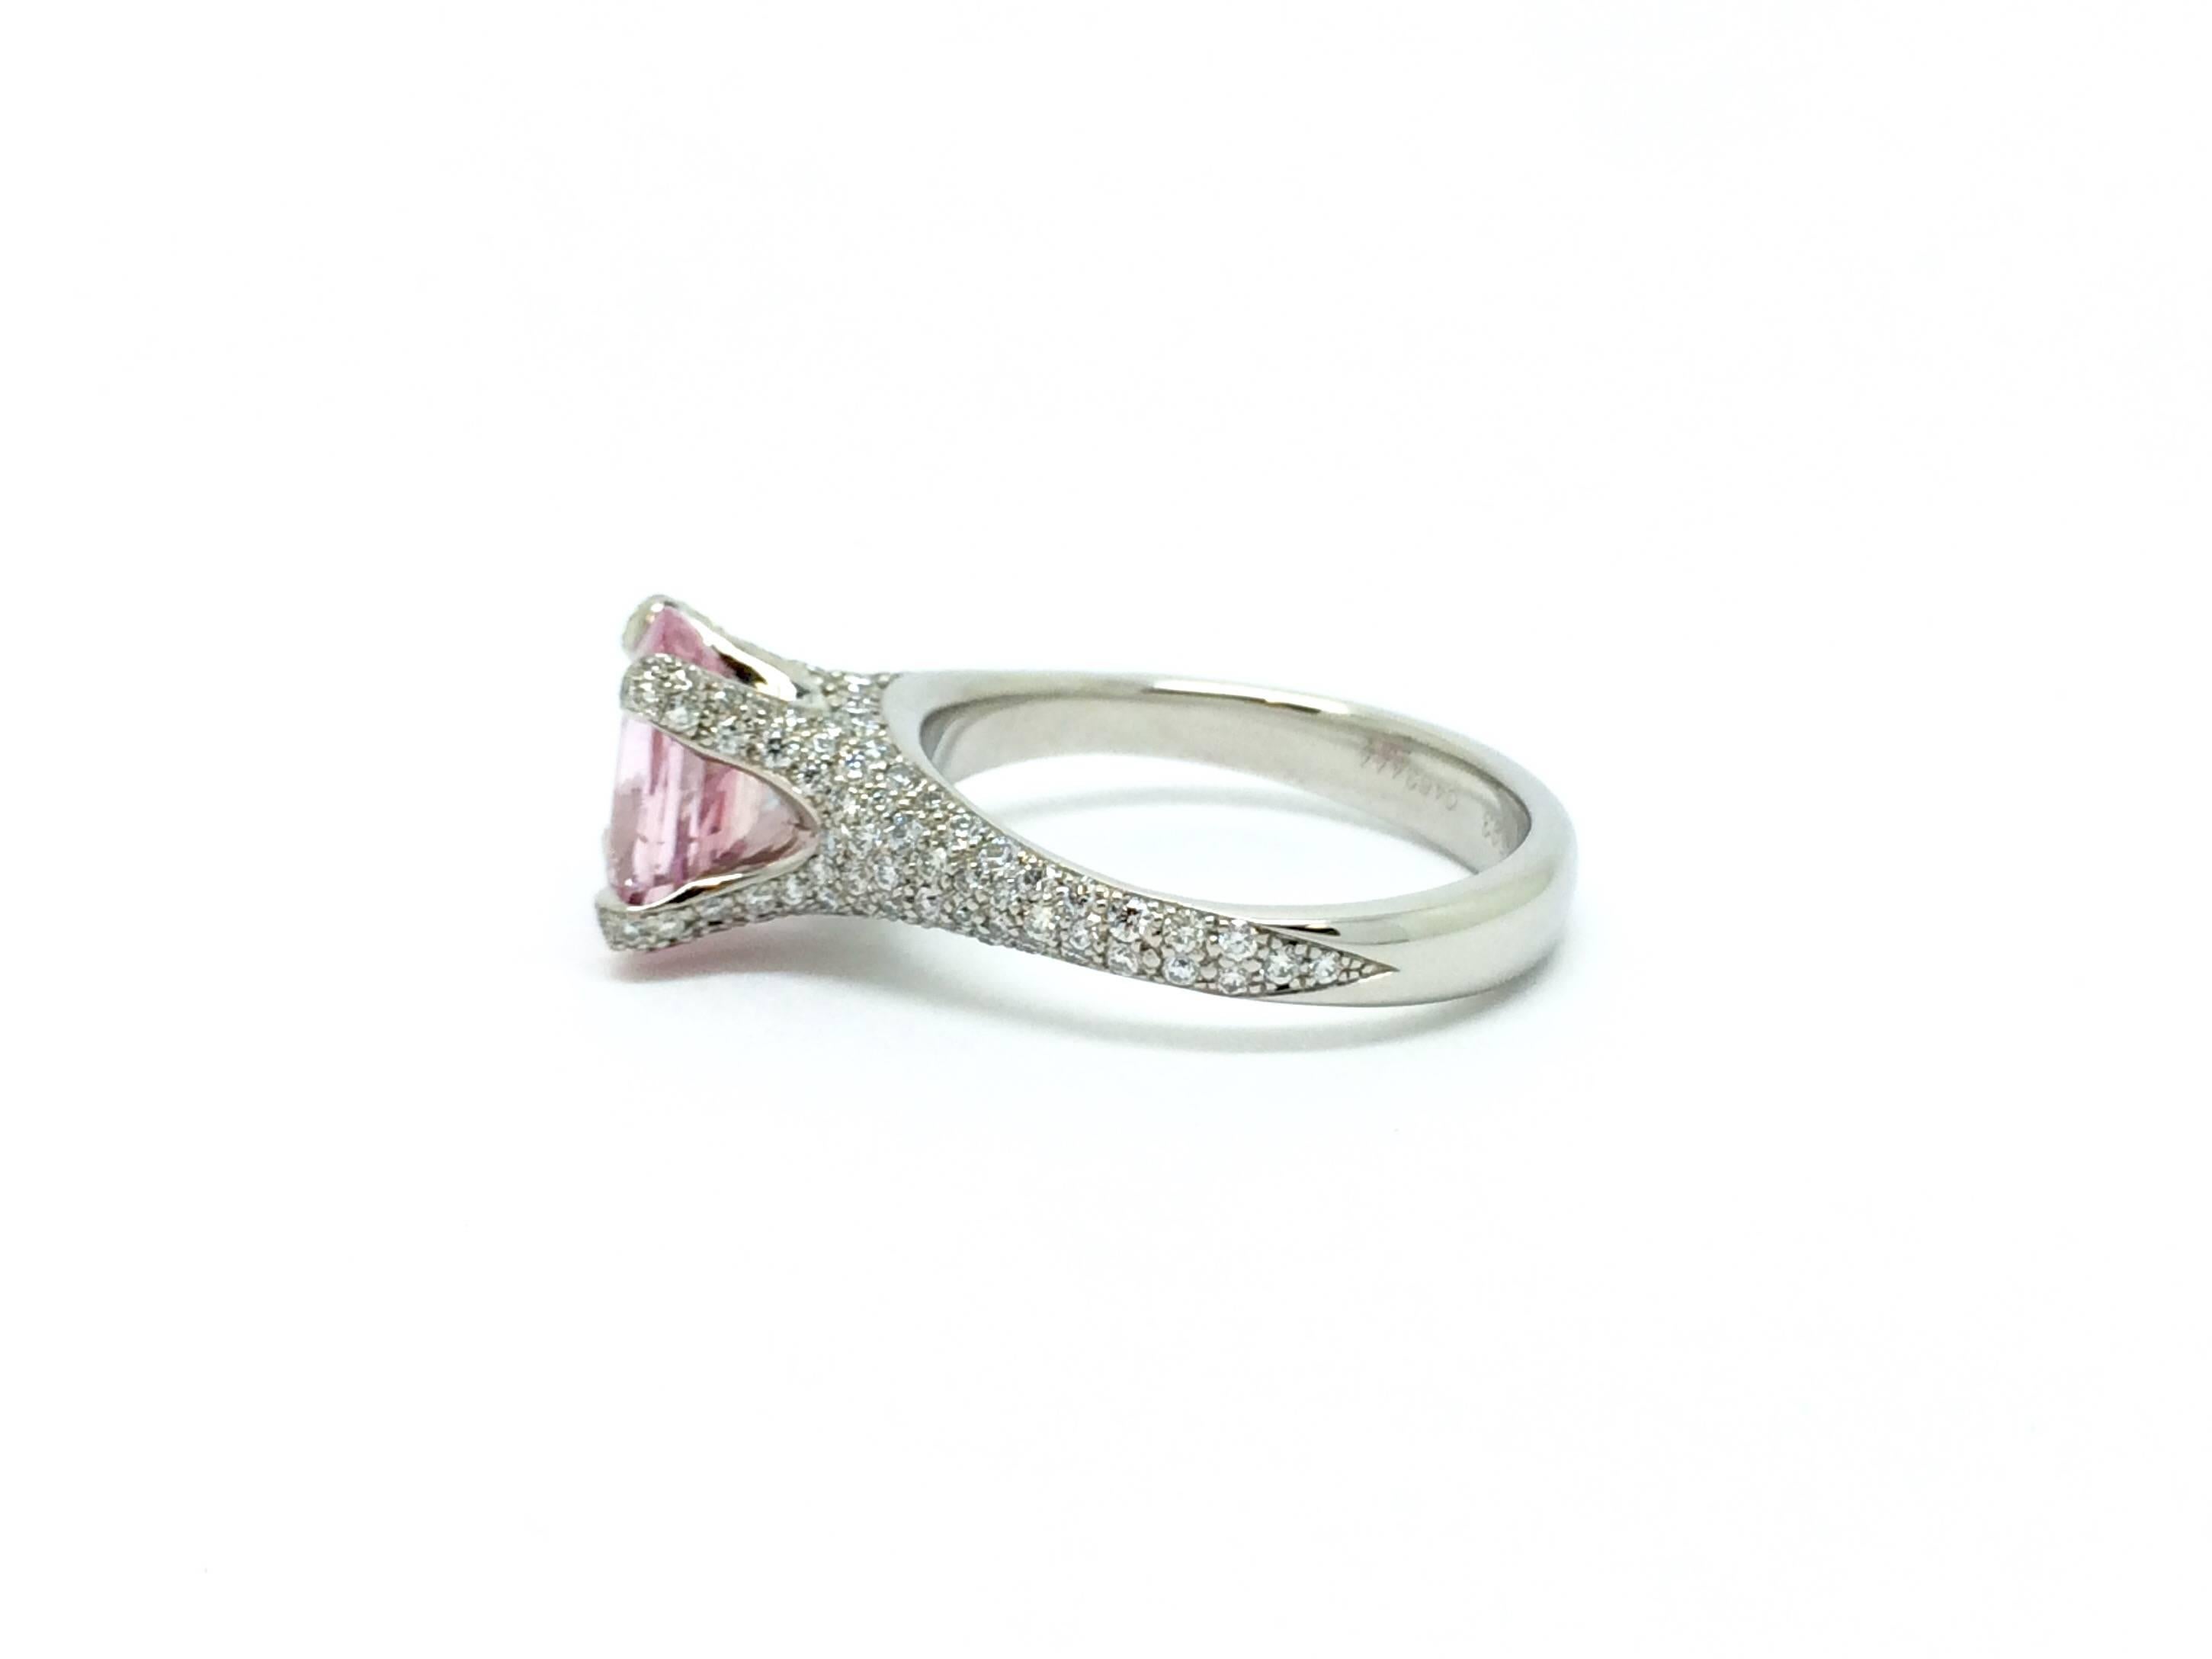 One Platinum Pave Diamond and Oval Pink Sapphire Ring. Furrer Jacot Swiss Designer, Diamonds are 0.59TW. Ring Features a 2.50 Oval Light Pink Sapphire. Stamped Pt950 FJ SWISS 139 TW VS 0.593 0463444.